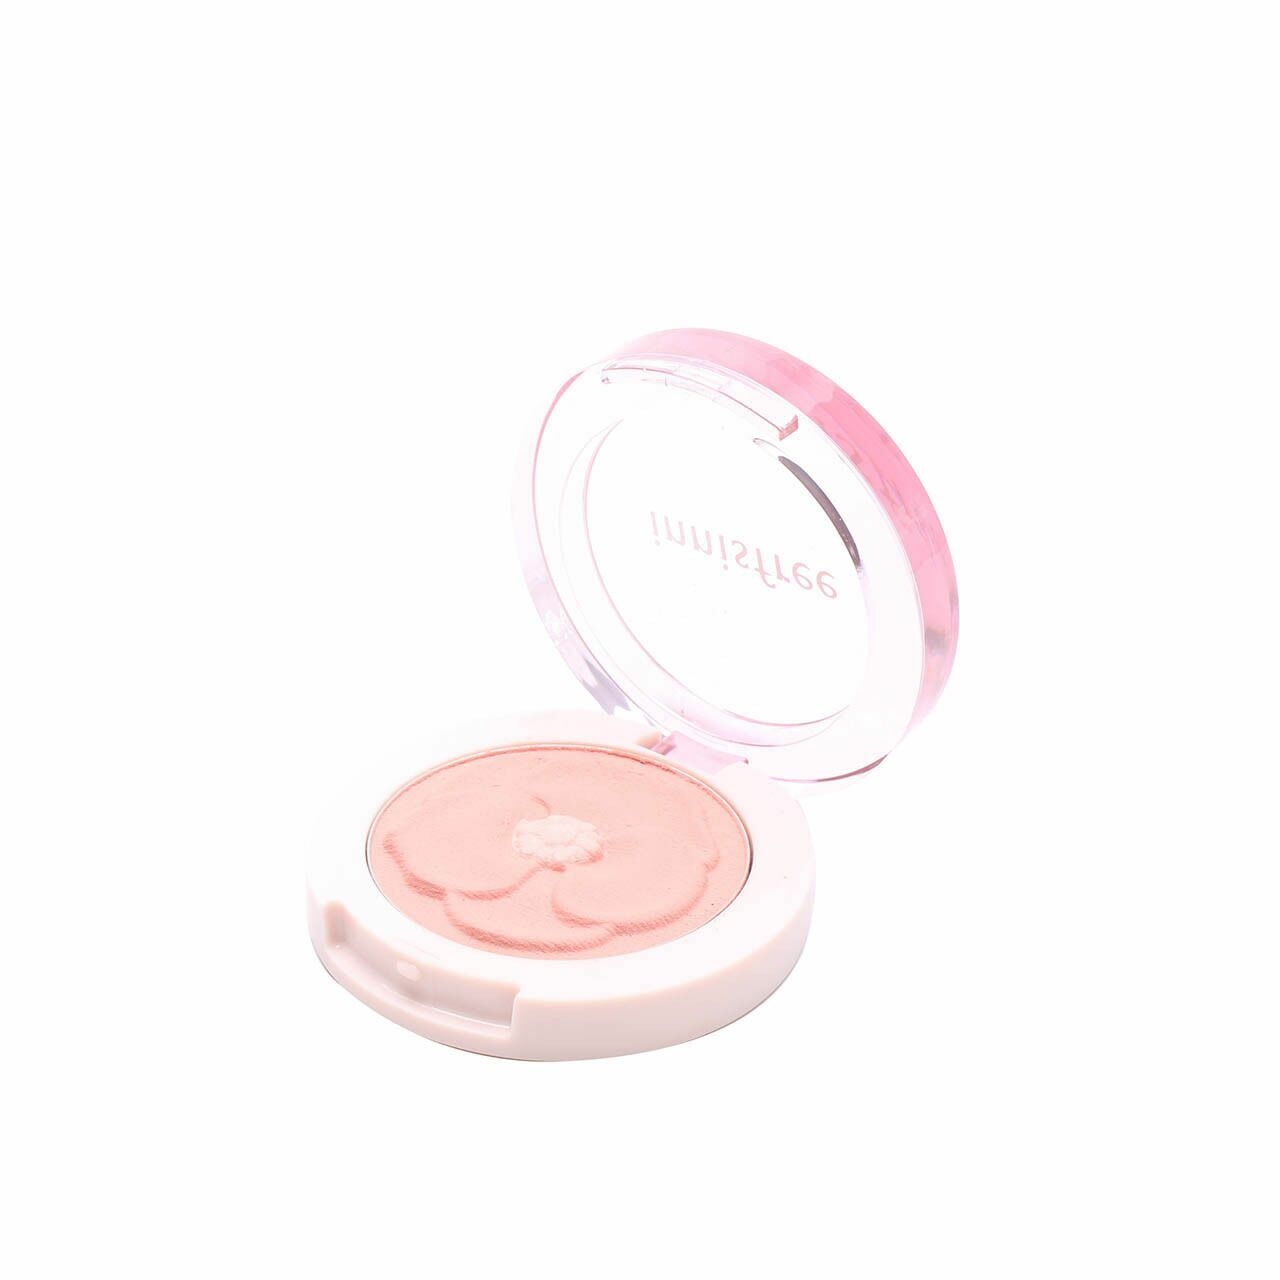 Innisfree Jeju Color Picker Camelia Blooming Blusher 2 Faces